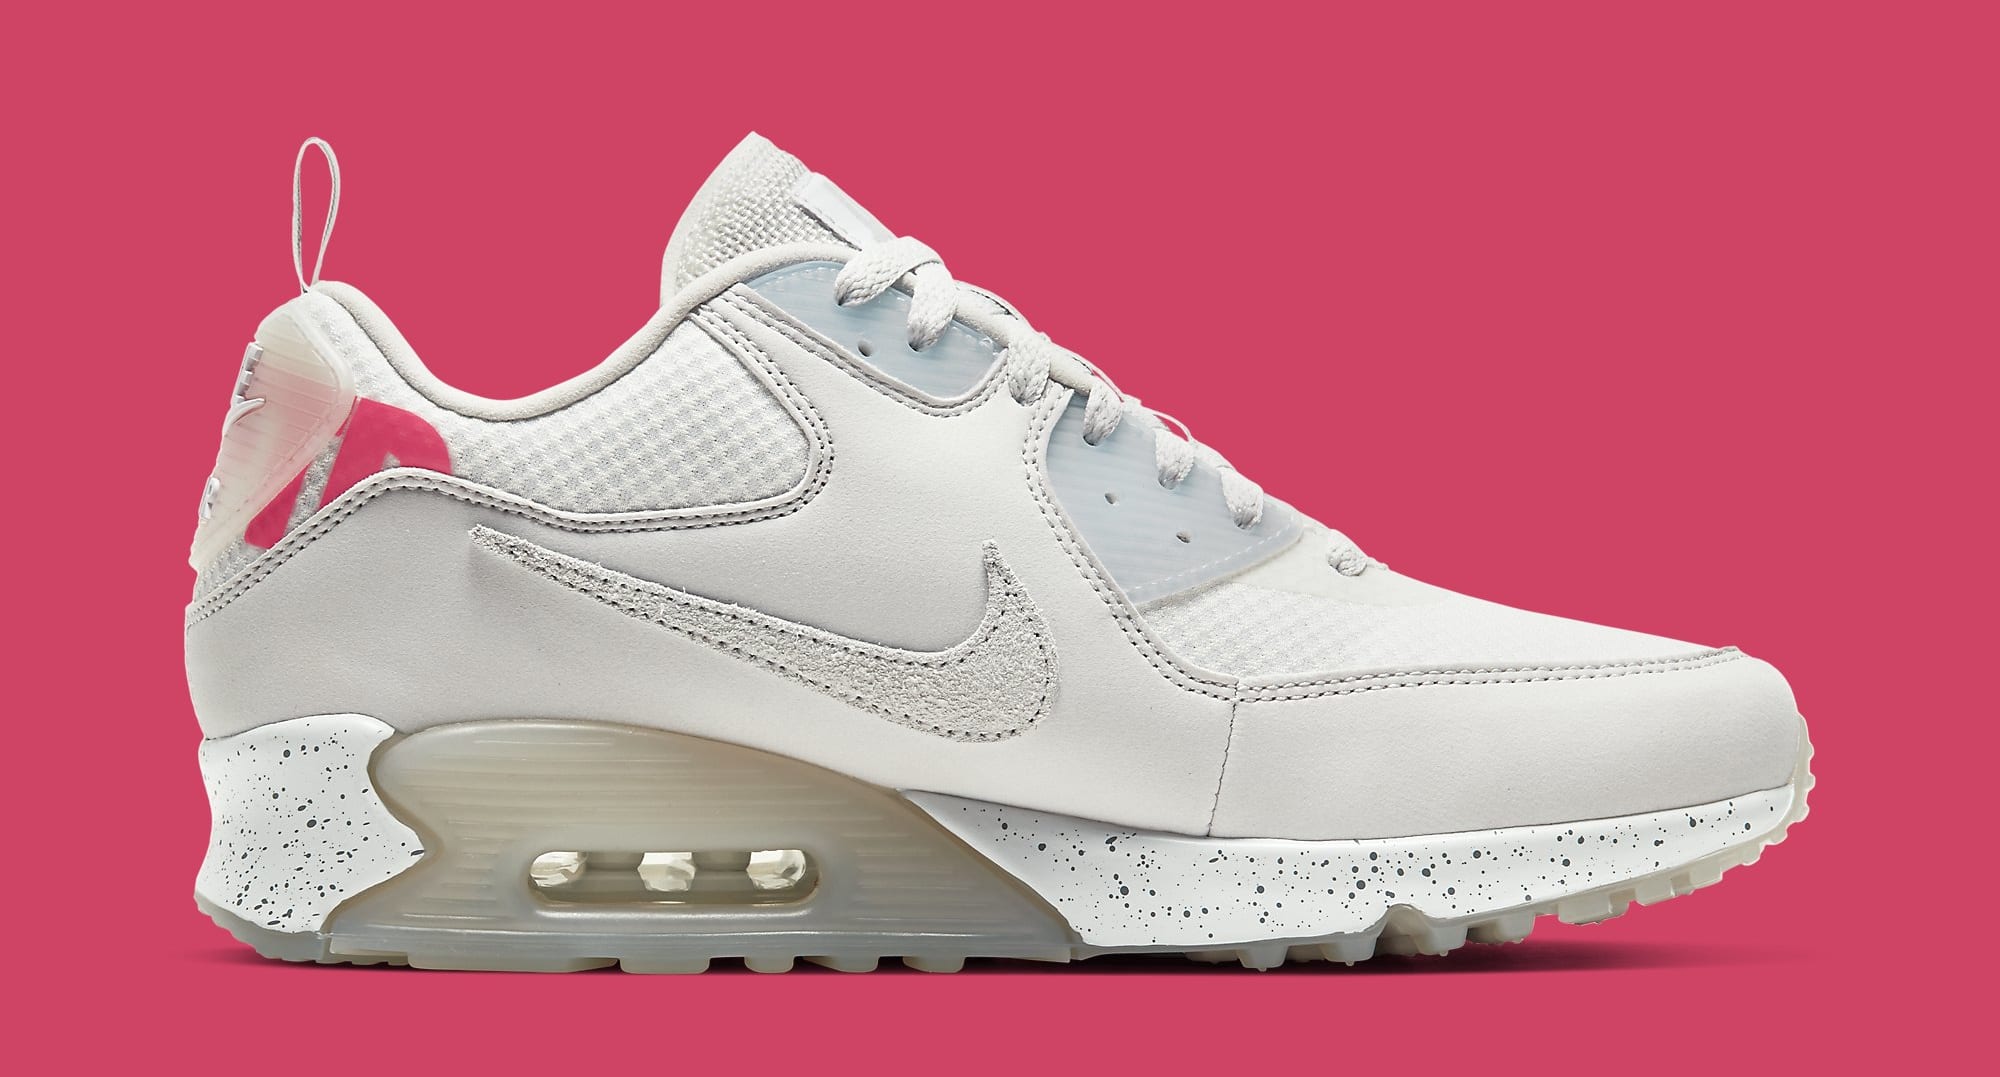 undefeated-nike-air-max-90-pure-platinum-cq2289-001-medial